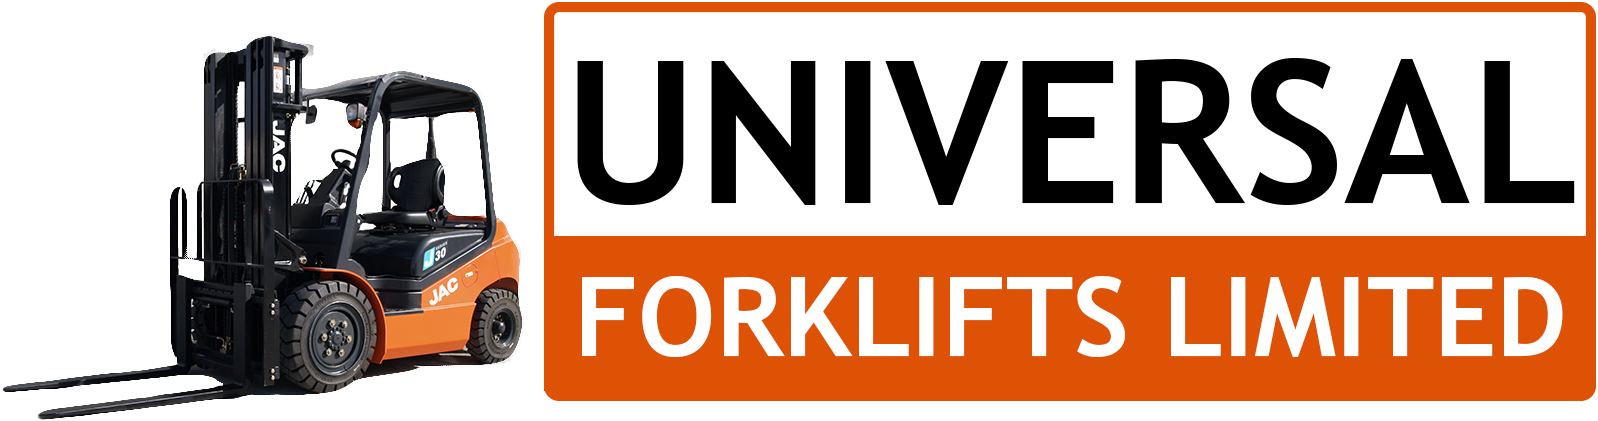 Universal Forklifts